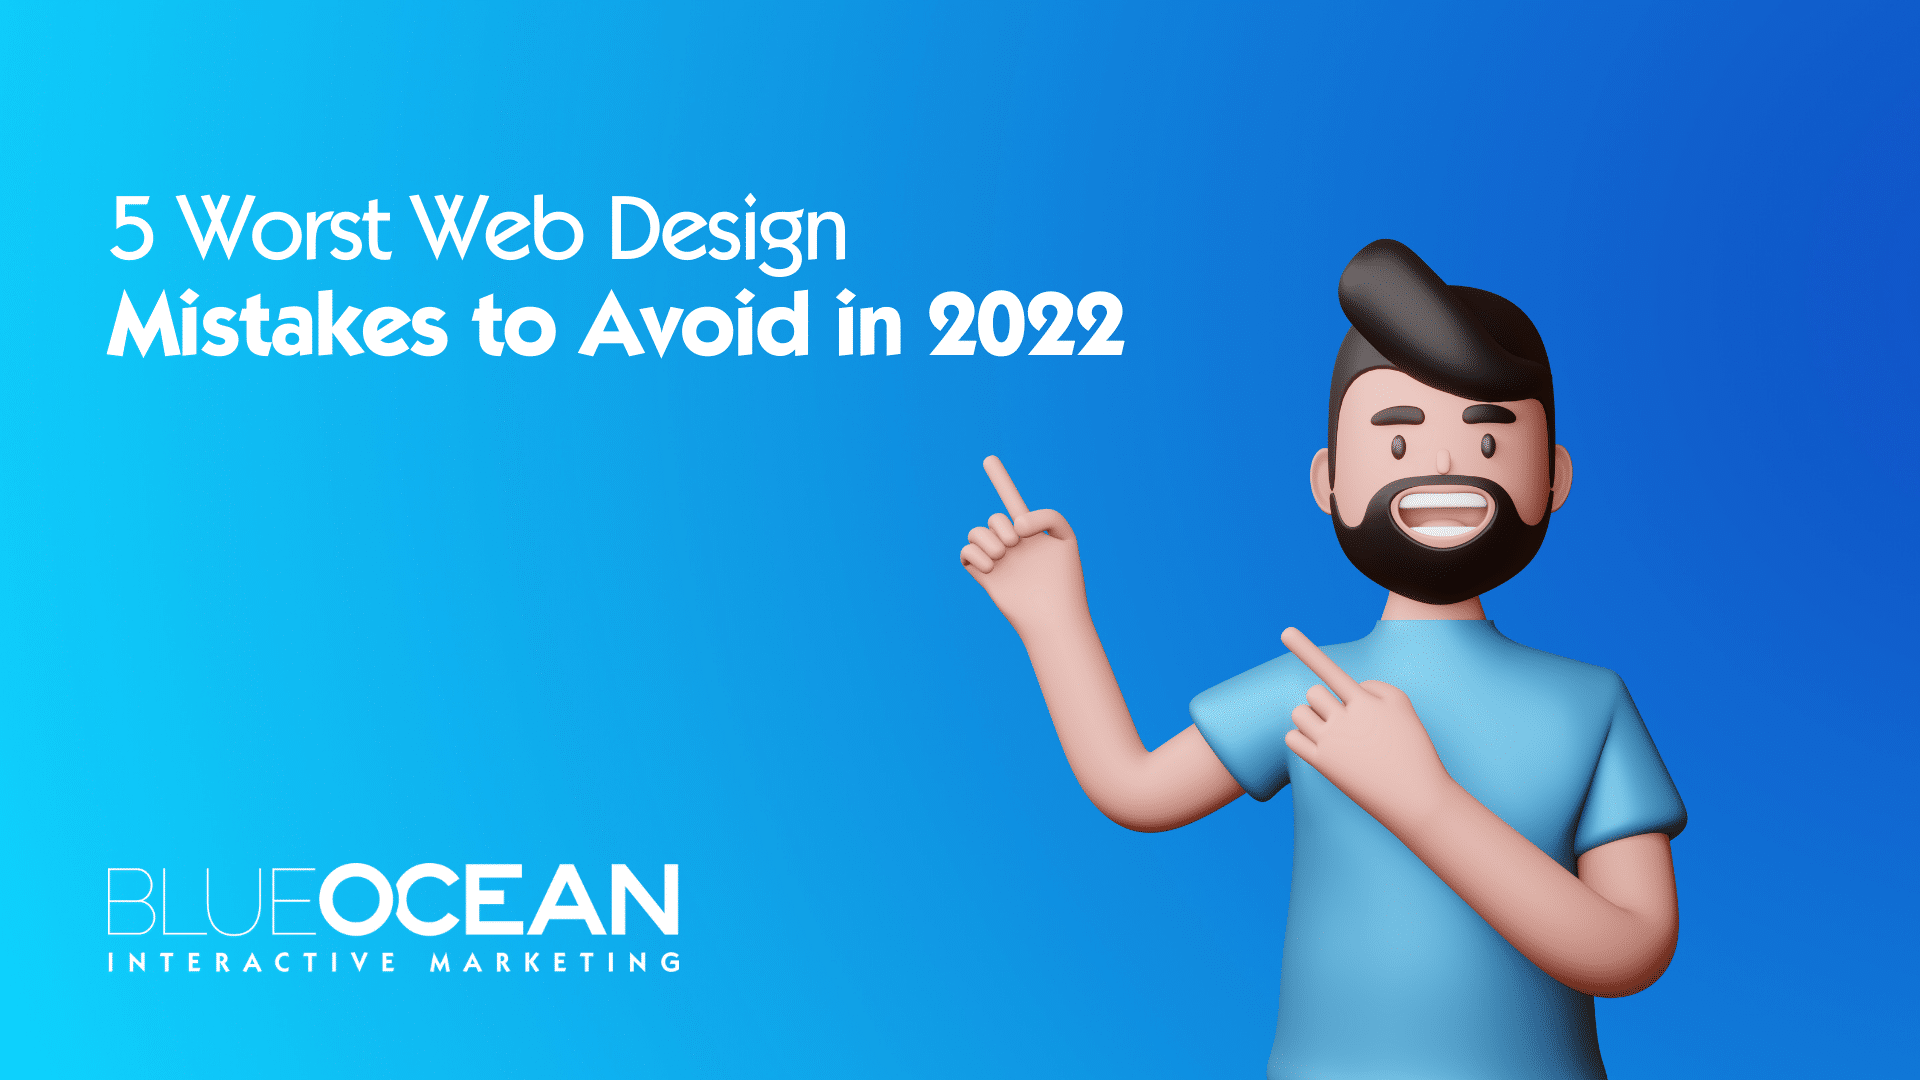 5 Worst Web Design Mistakes to Avoid in 2022